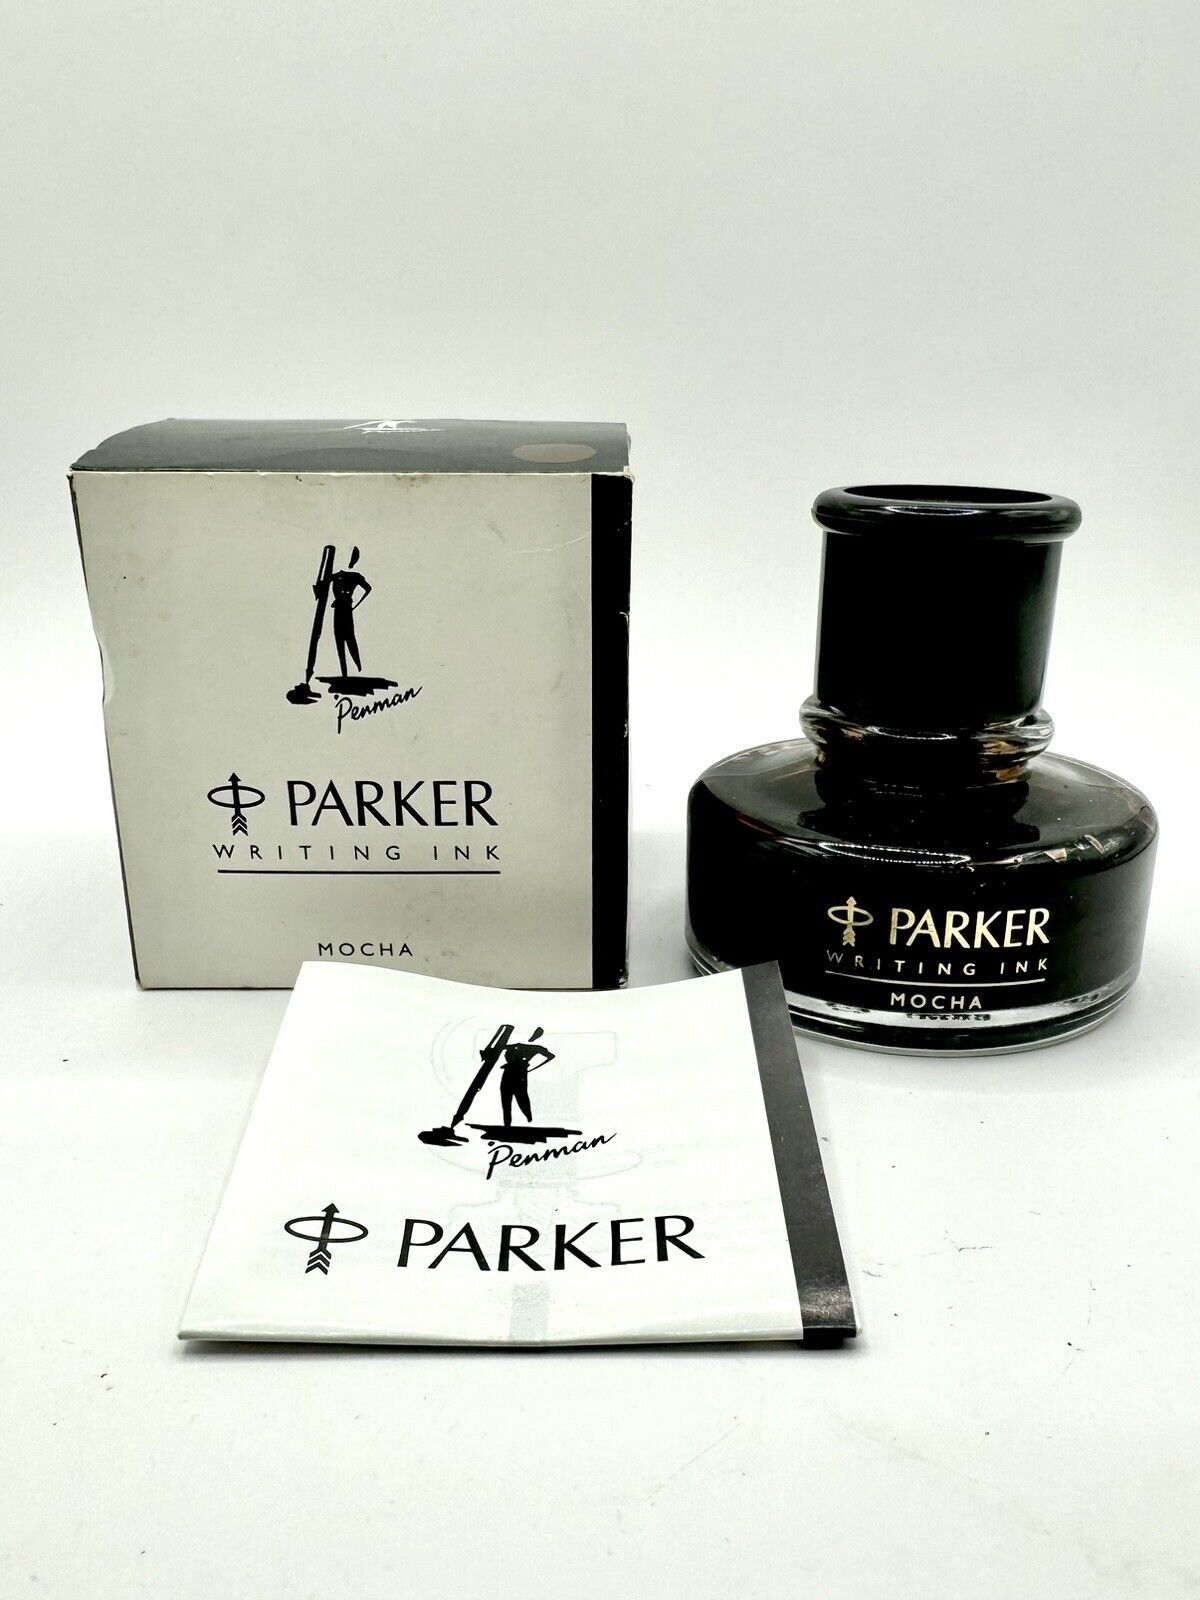 NOS PARKER PENMAN MOCHA BROWN INK, NEW BOTTLE 50ml BOXED PAPERS DISCONTINUED